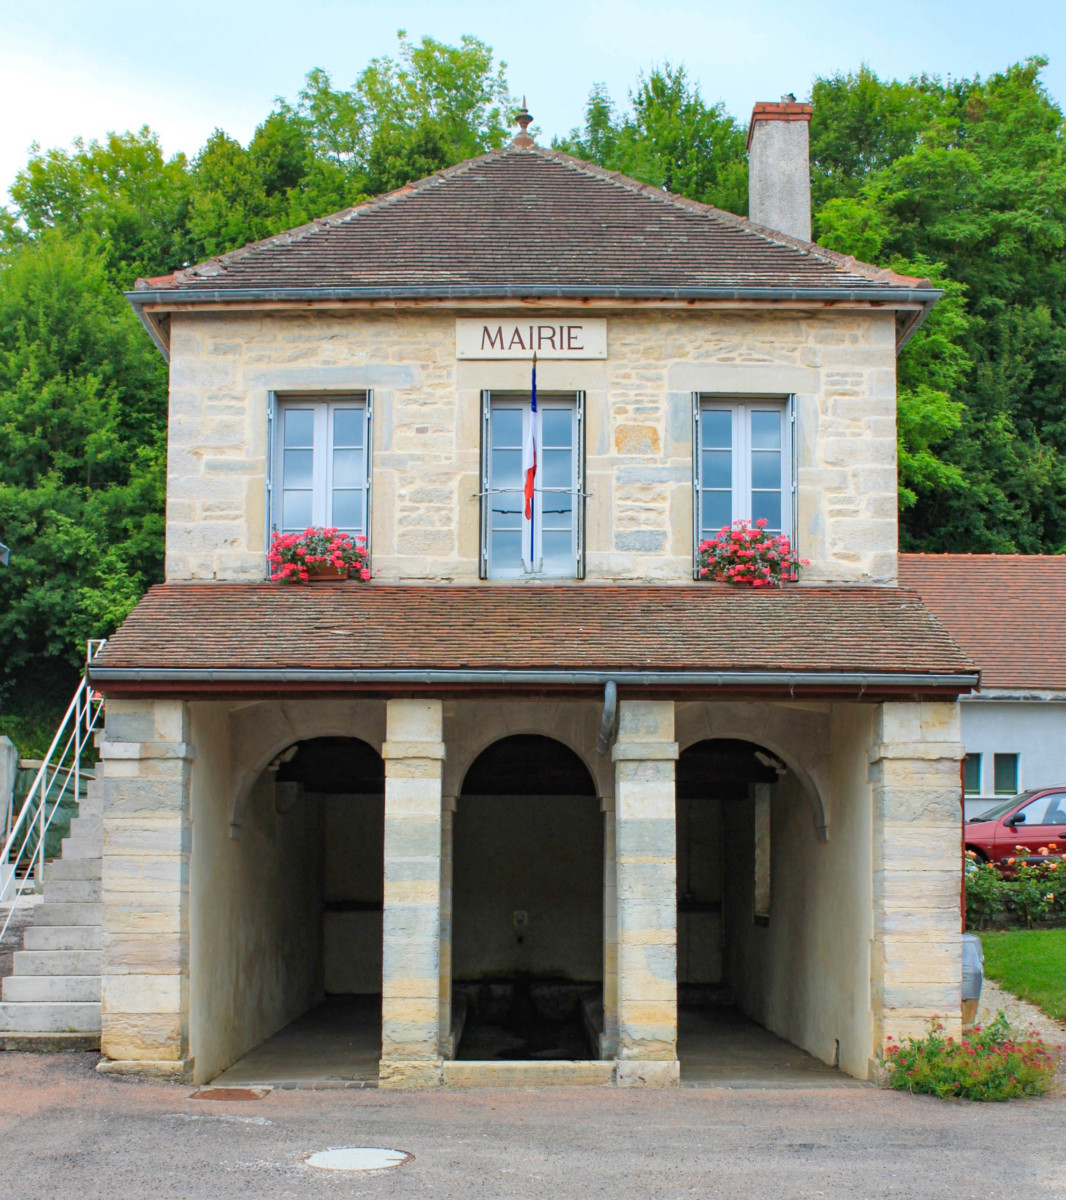 La Mairie-Lavoir de Reulle-Vergy © Christophe.Finot - licence [CC BY-SA 3.0] from Wikimedia Commons